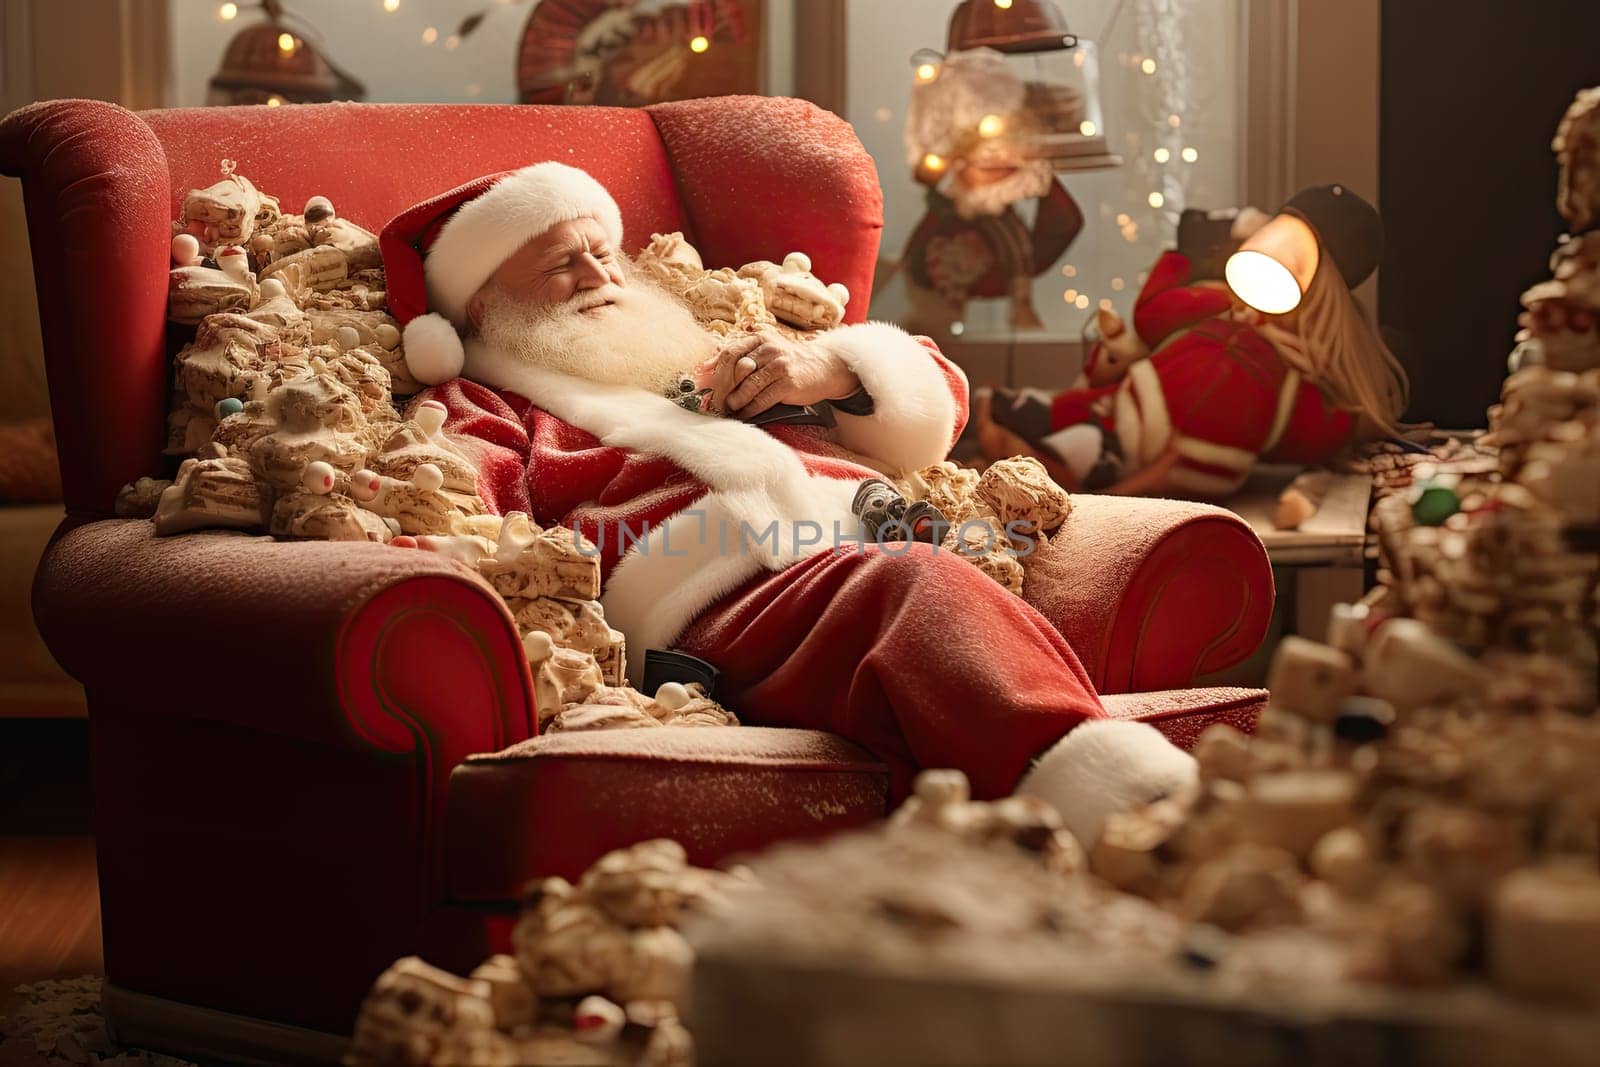 Santa Claus Relaxing in a Festive Red Chair, Admiring a Beautifully Decorated Christmas Tree